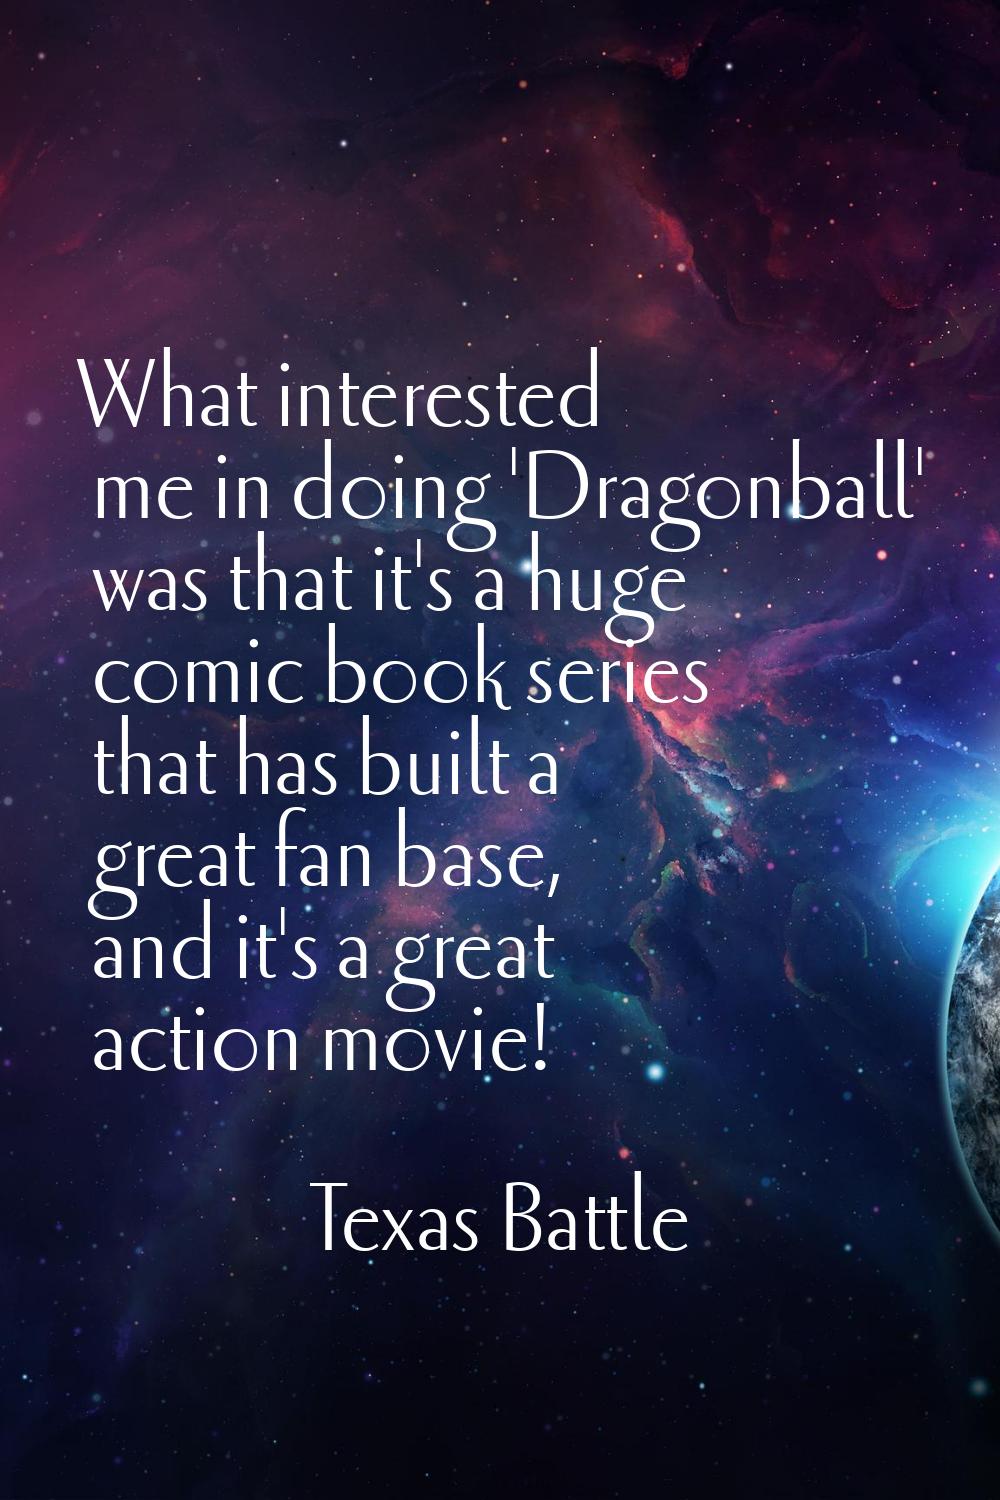 What interested me in doing 'Dragonball' was that it's a huge comic book series that has built a gr